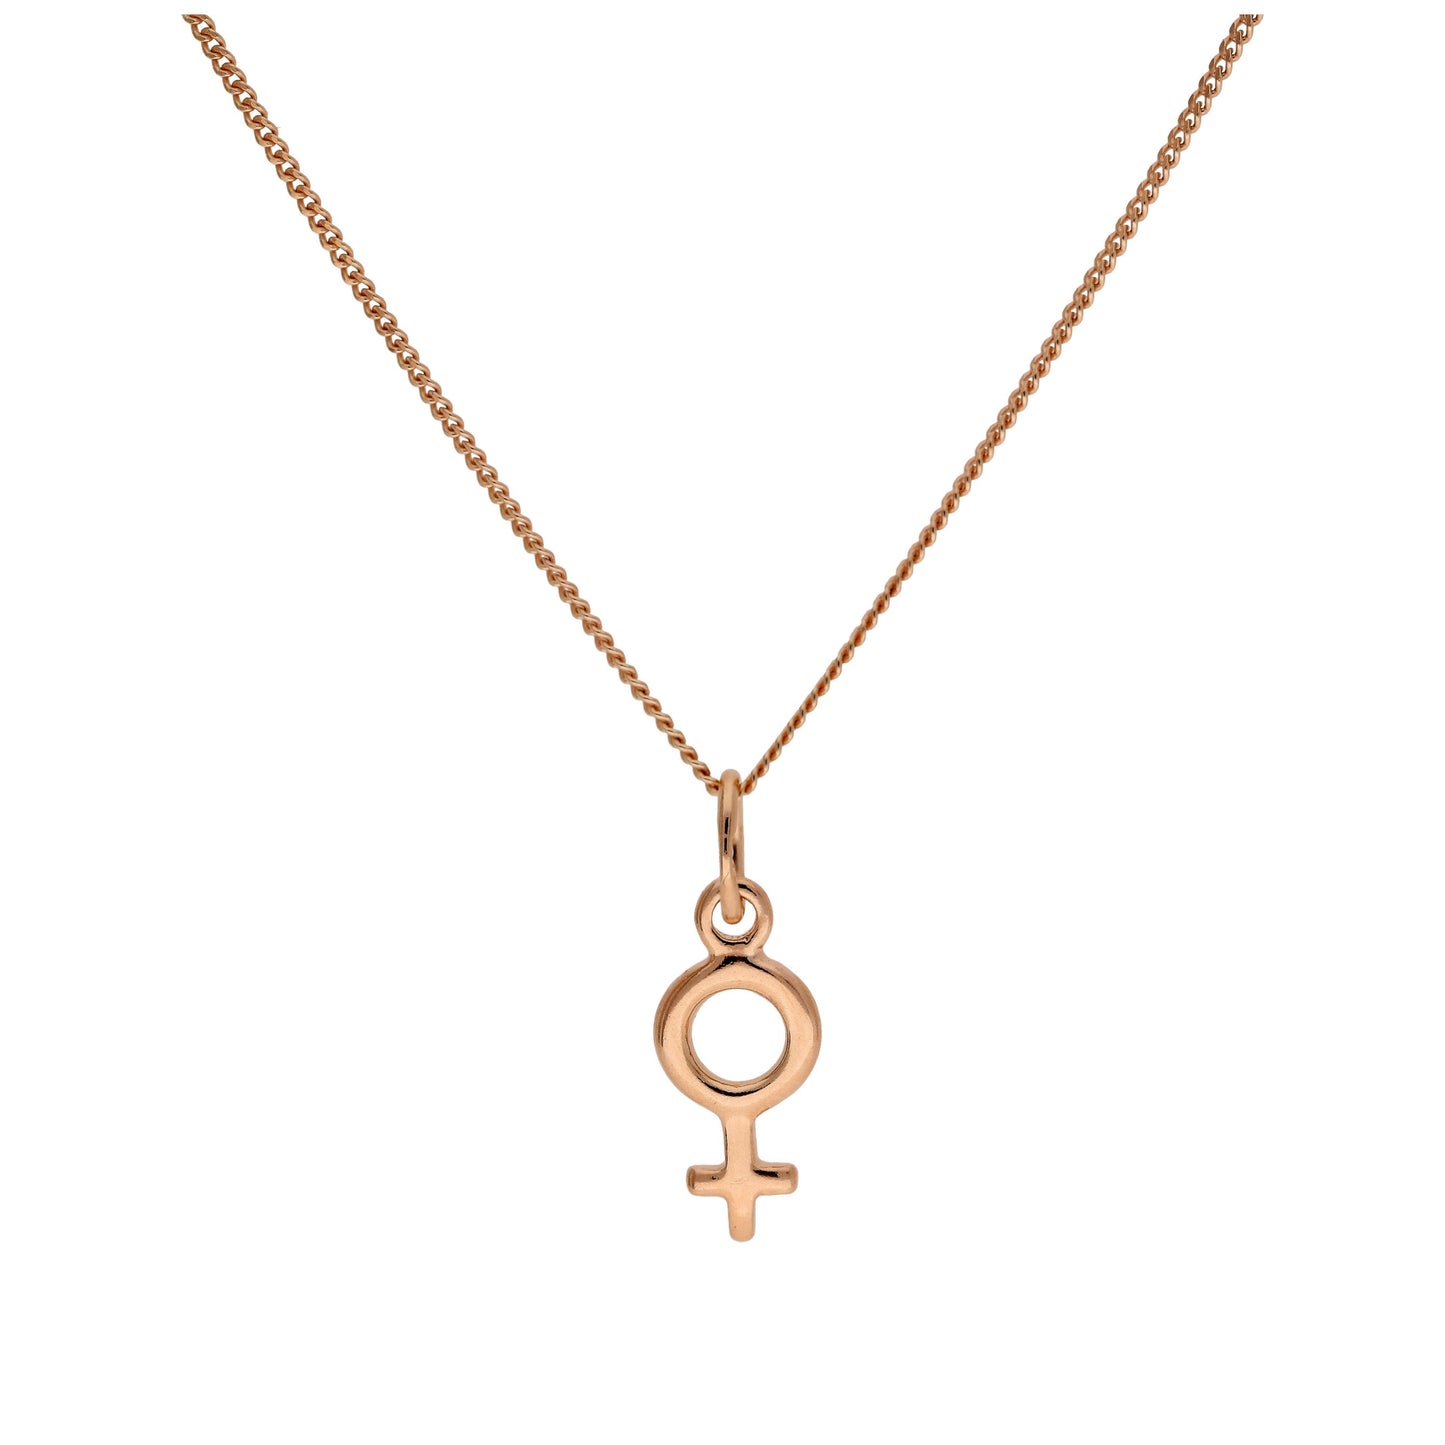 Small Rose Gold Plated Sterling Silver Female Symbol Necklace 14 - 32 Inches